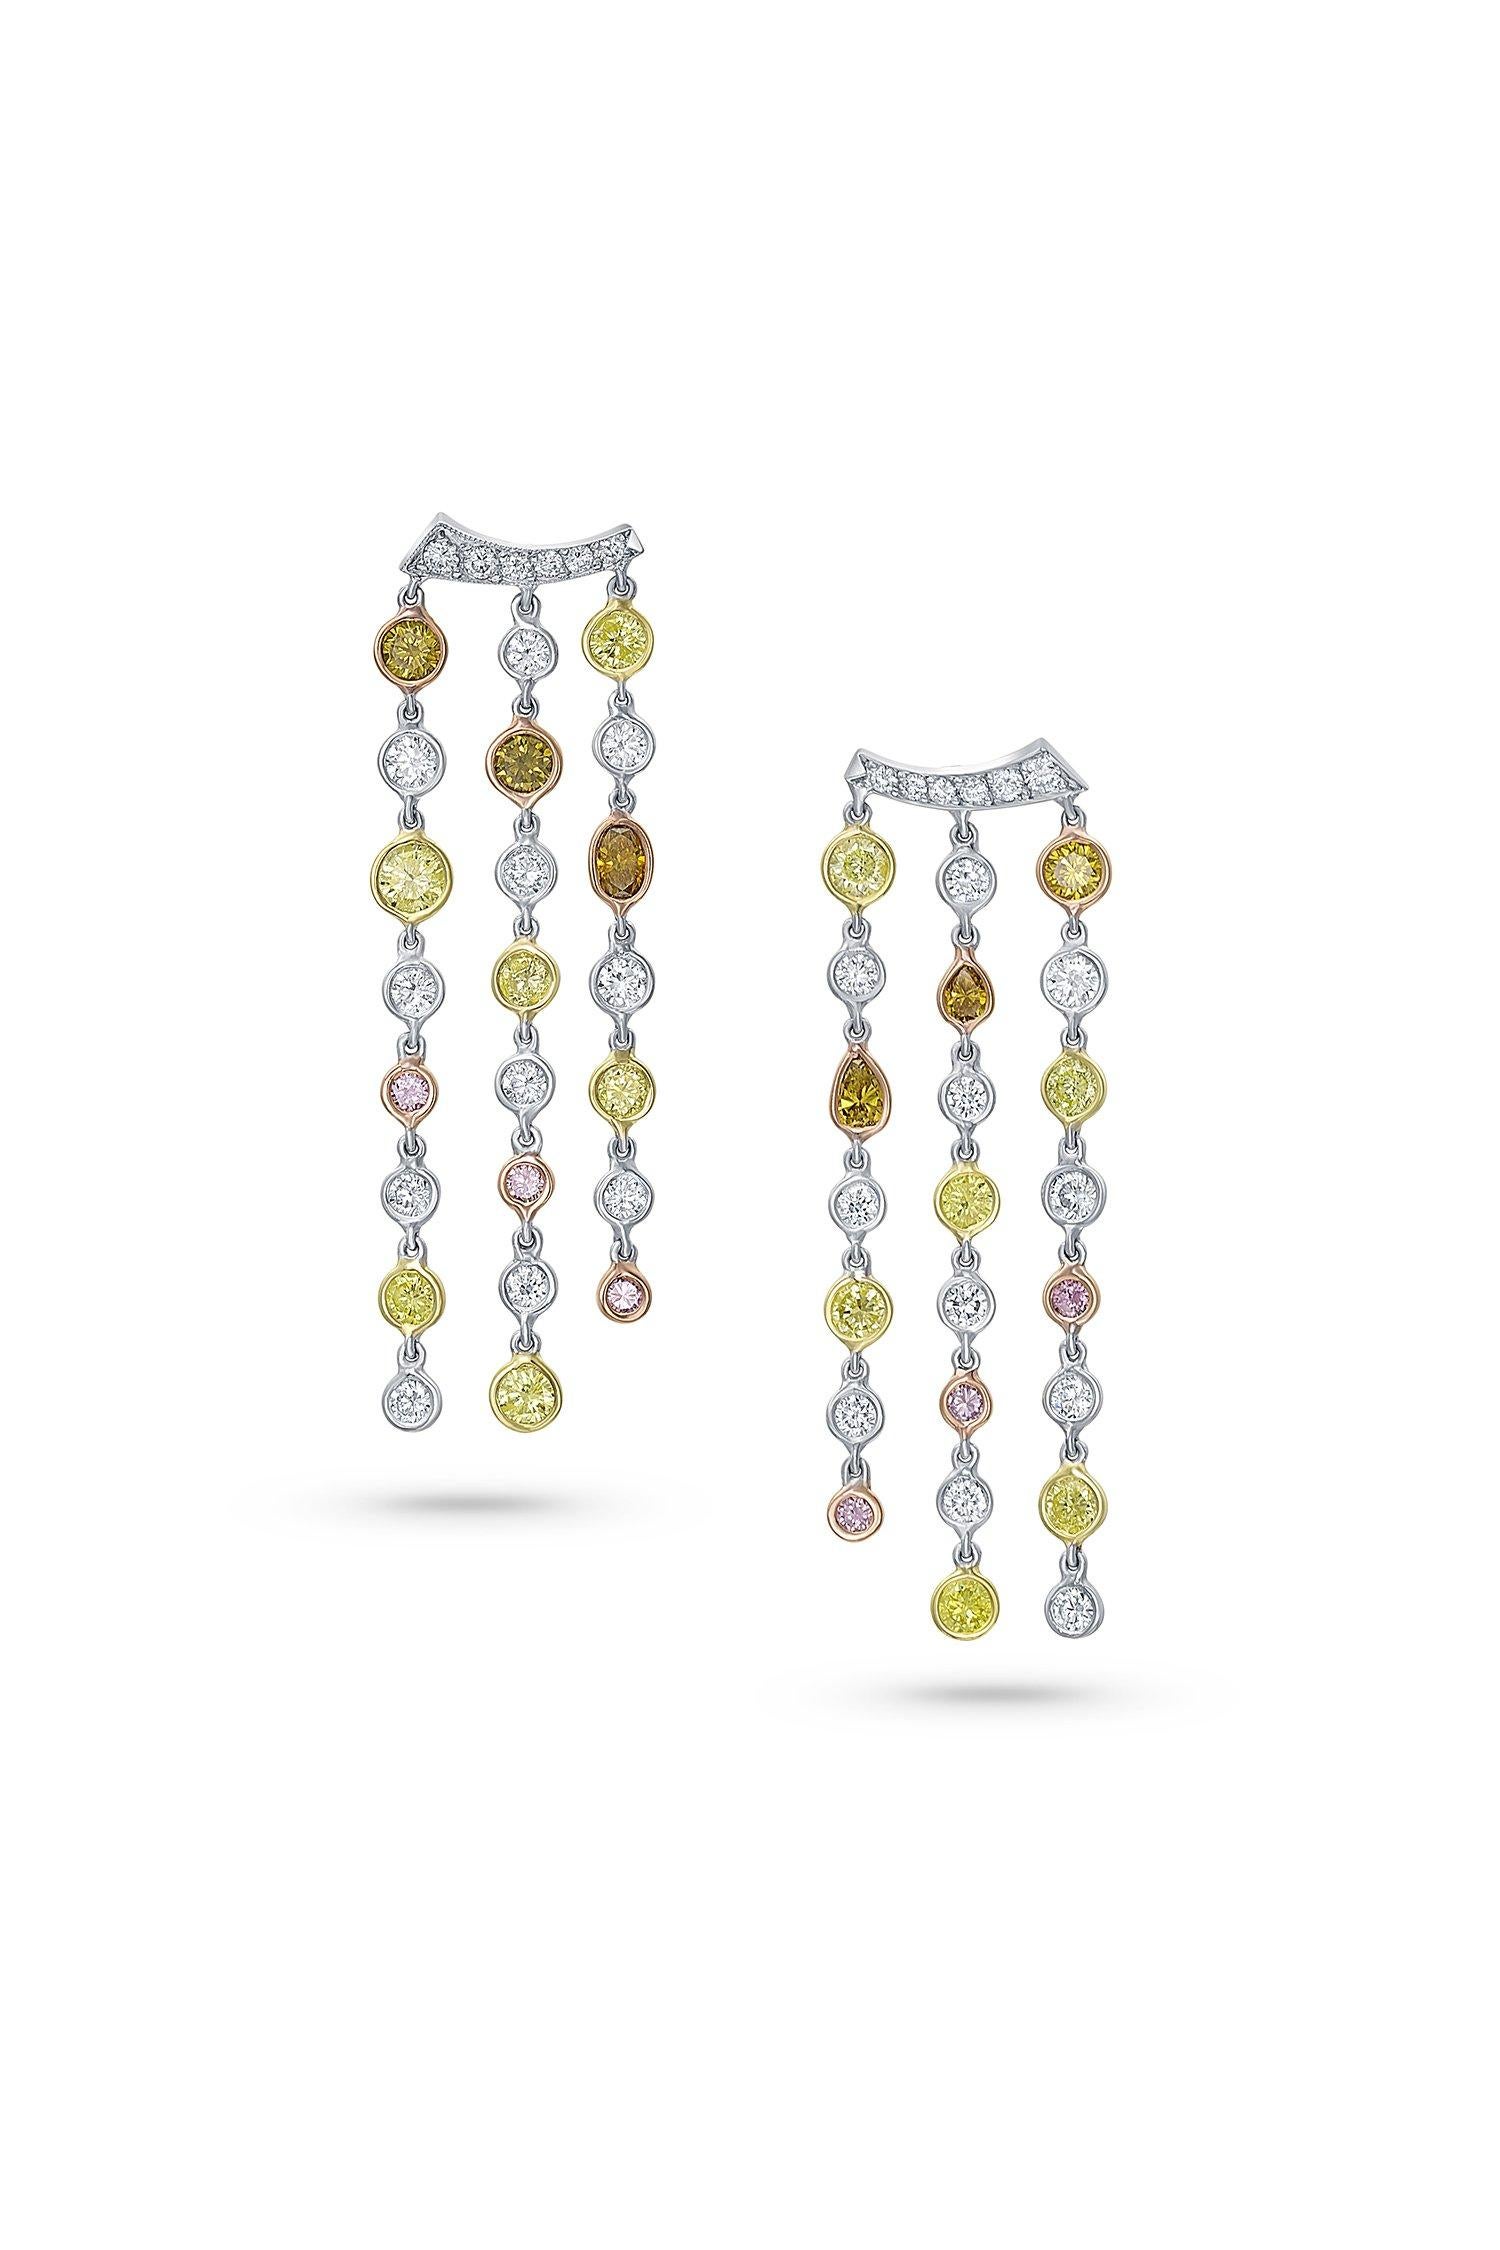 New from the Rivière Collection, these exquisite earrings feature an elegantly curved shape set with pavé diamonds and three strands of scintillating  multicolor diamonds cascading down. The finest craftsmanship and design create fluidity and a